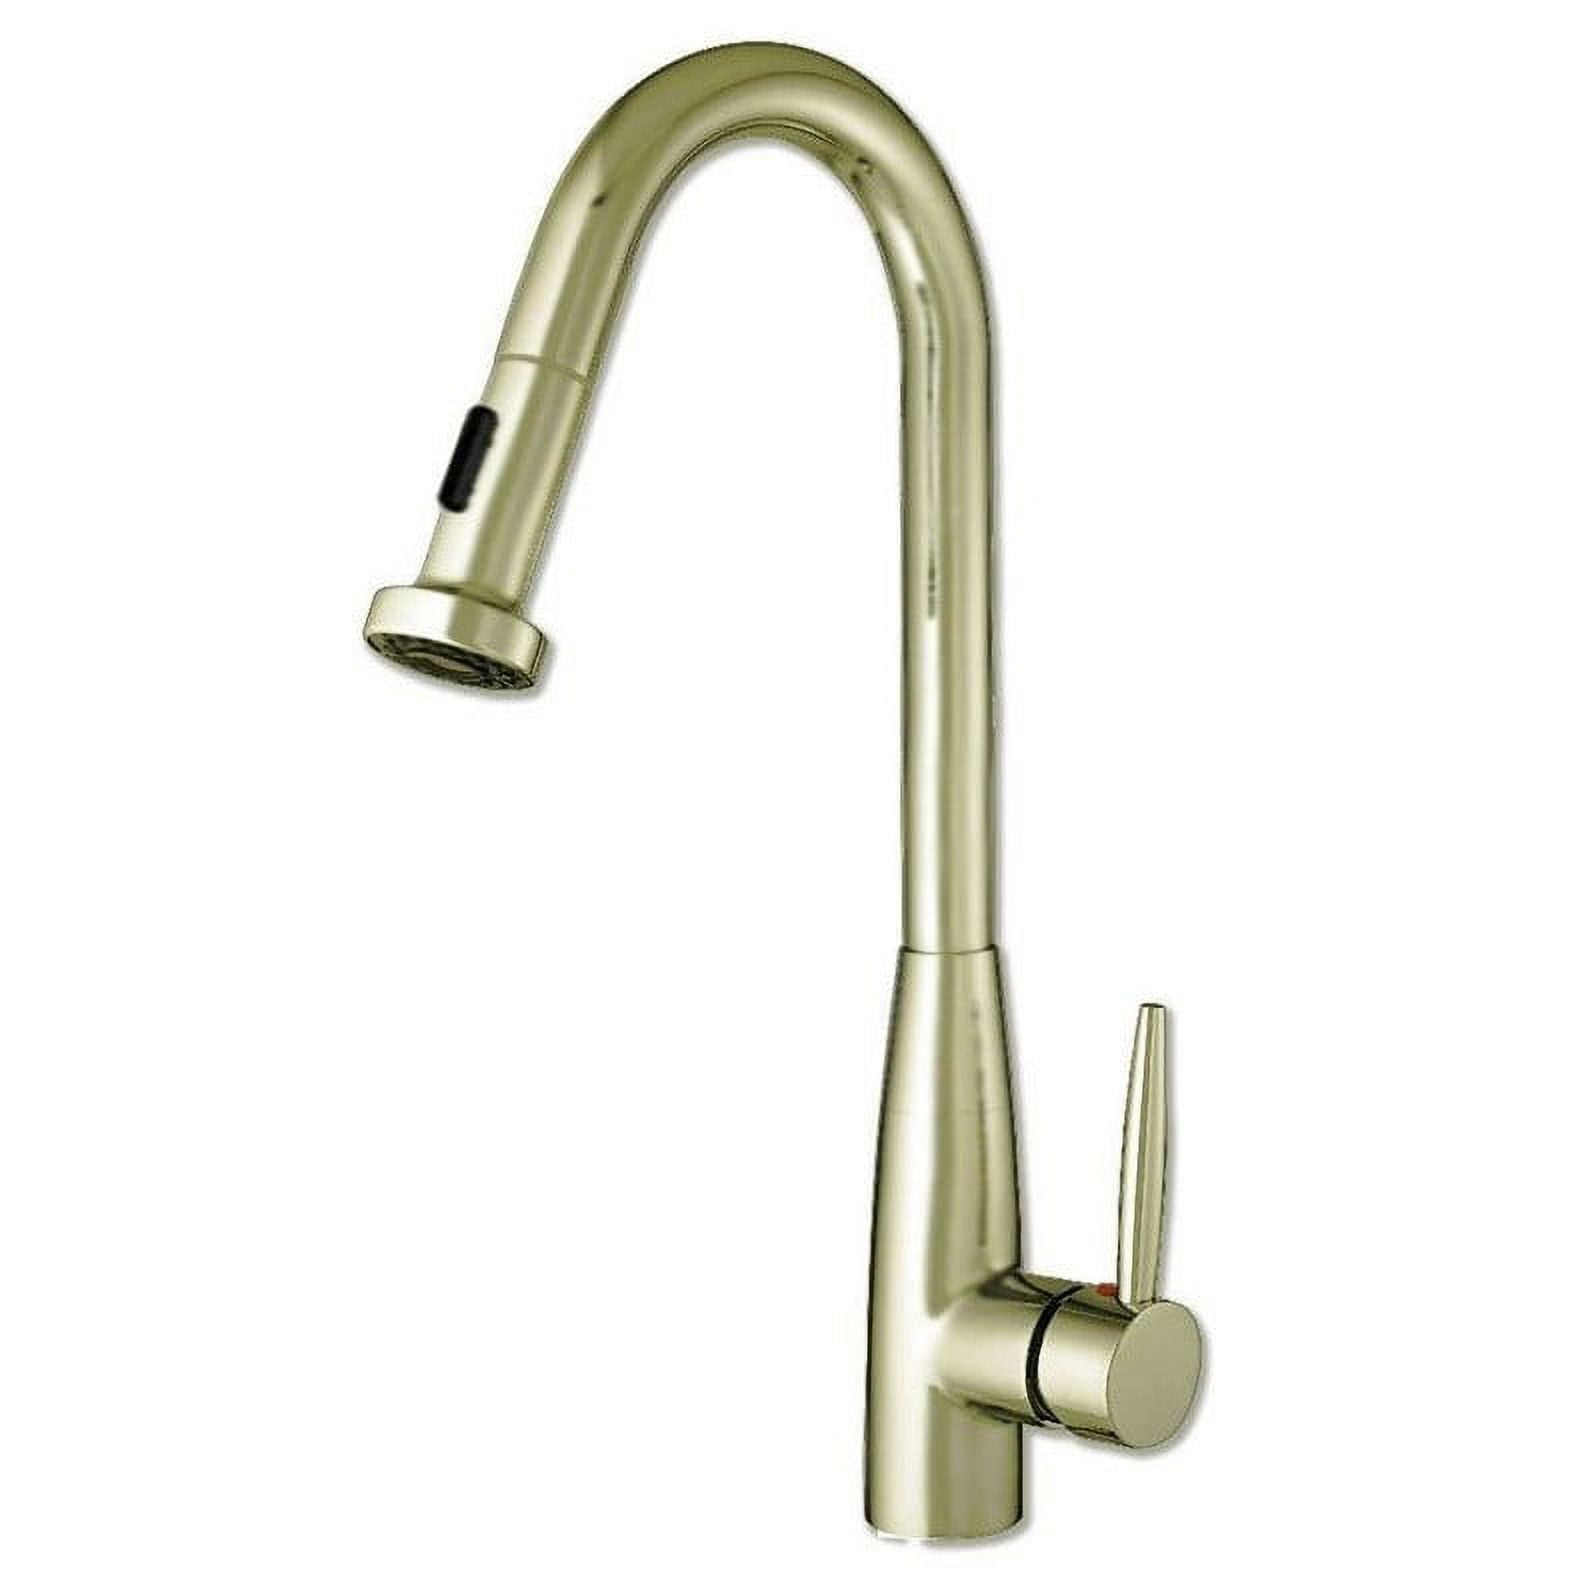 Whitehaus Collection WH2070838-BN JEM Collection Single-Hole & Single-Lever Handle Faucet with a Gooseneck Swivel Spout - Brushed Nickel